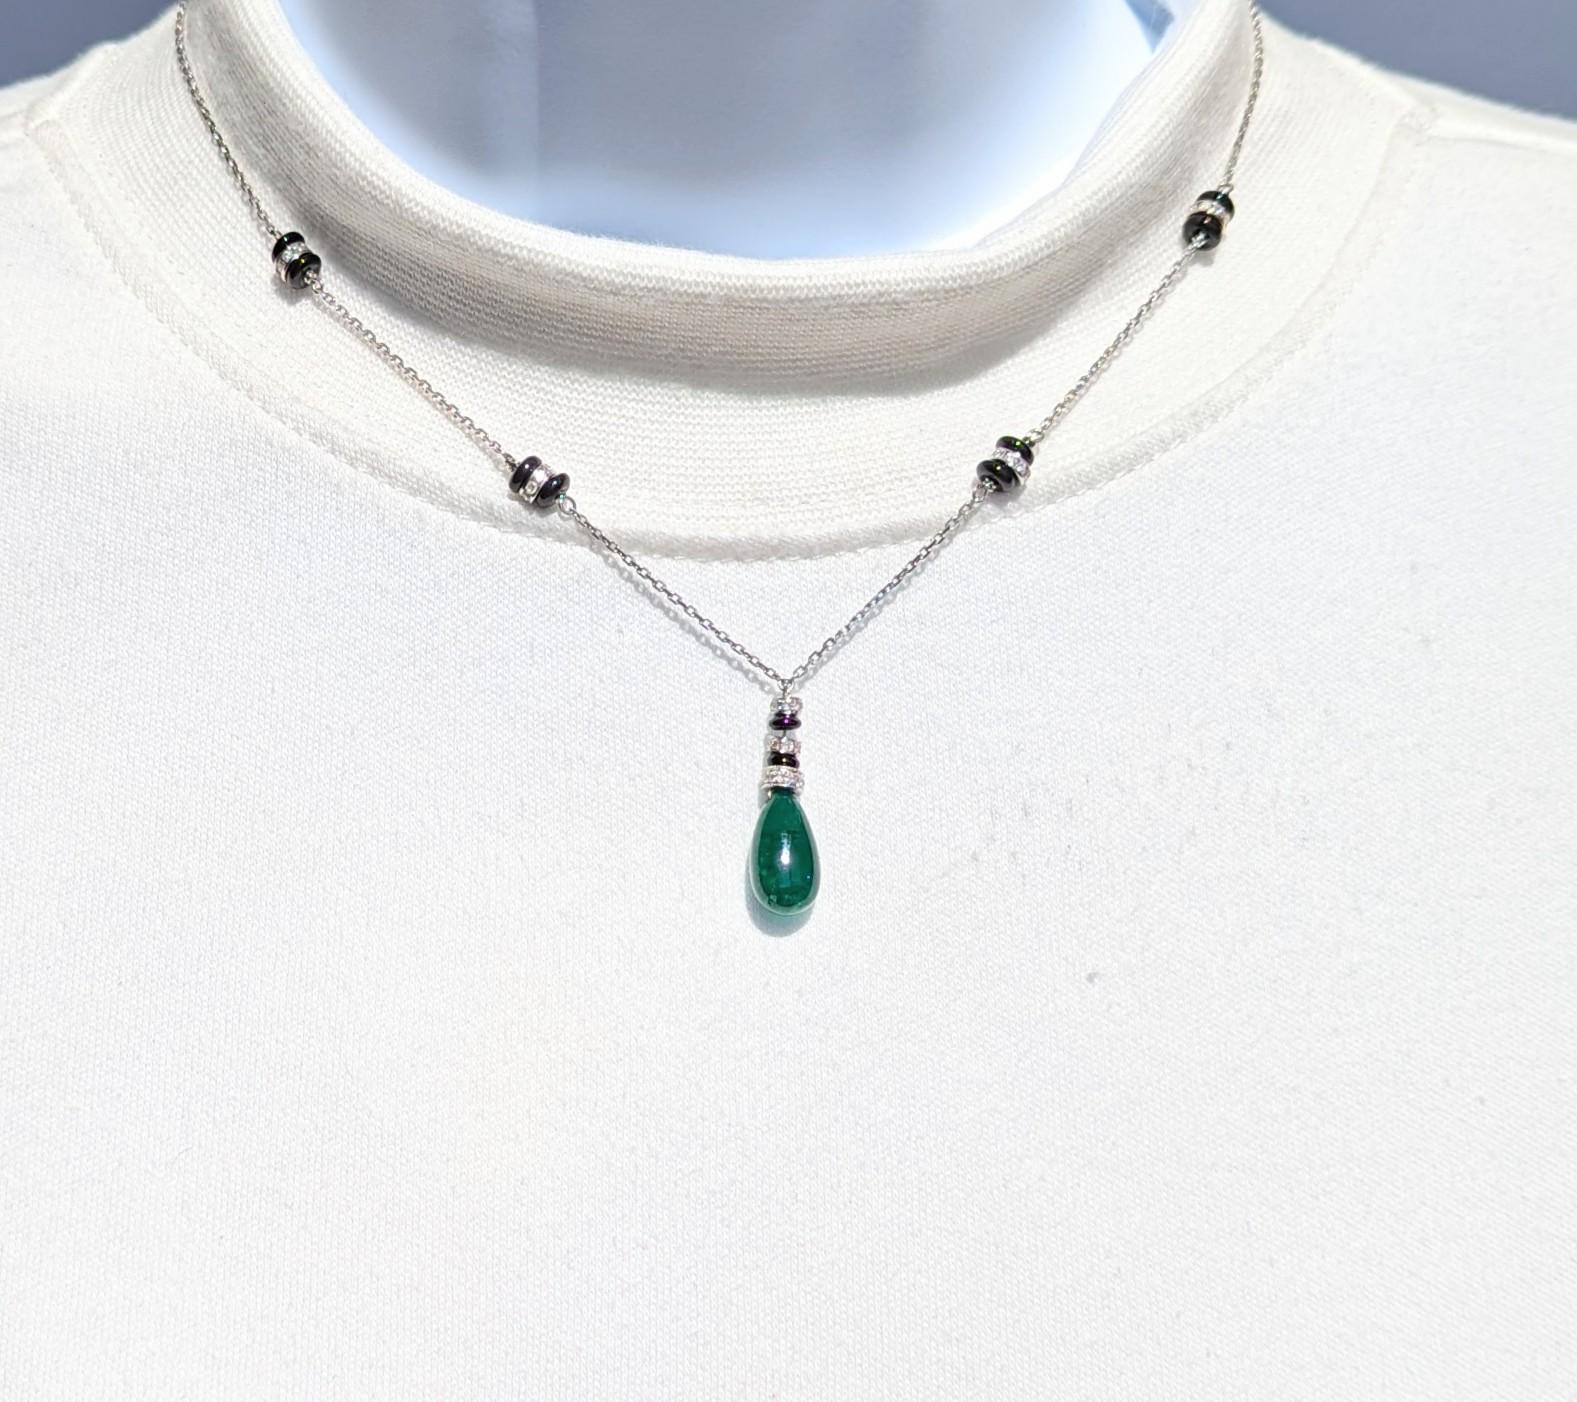 Beautiful Zambian emerald drop with good quality, white, and bright diamond rounds.  Handmade in 18k white gold.  Length is 16